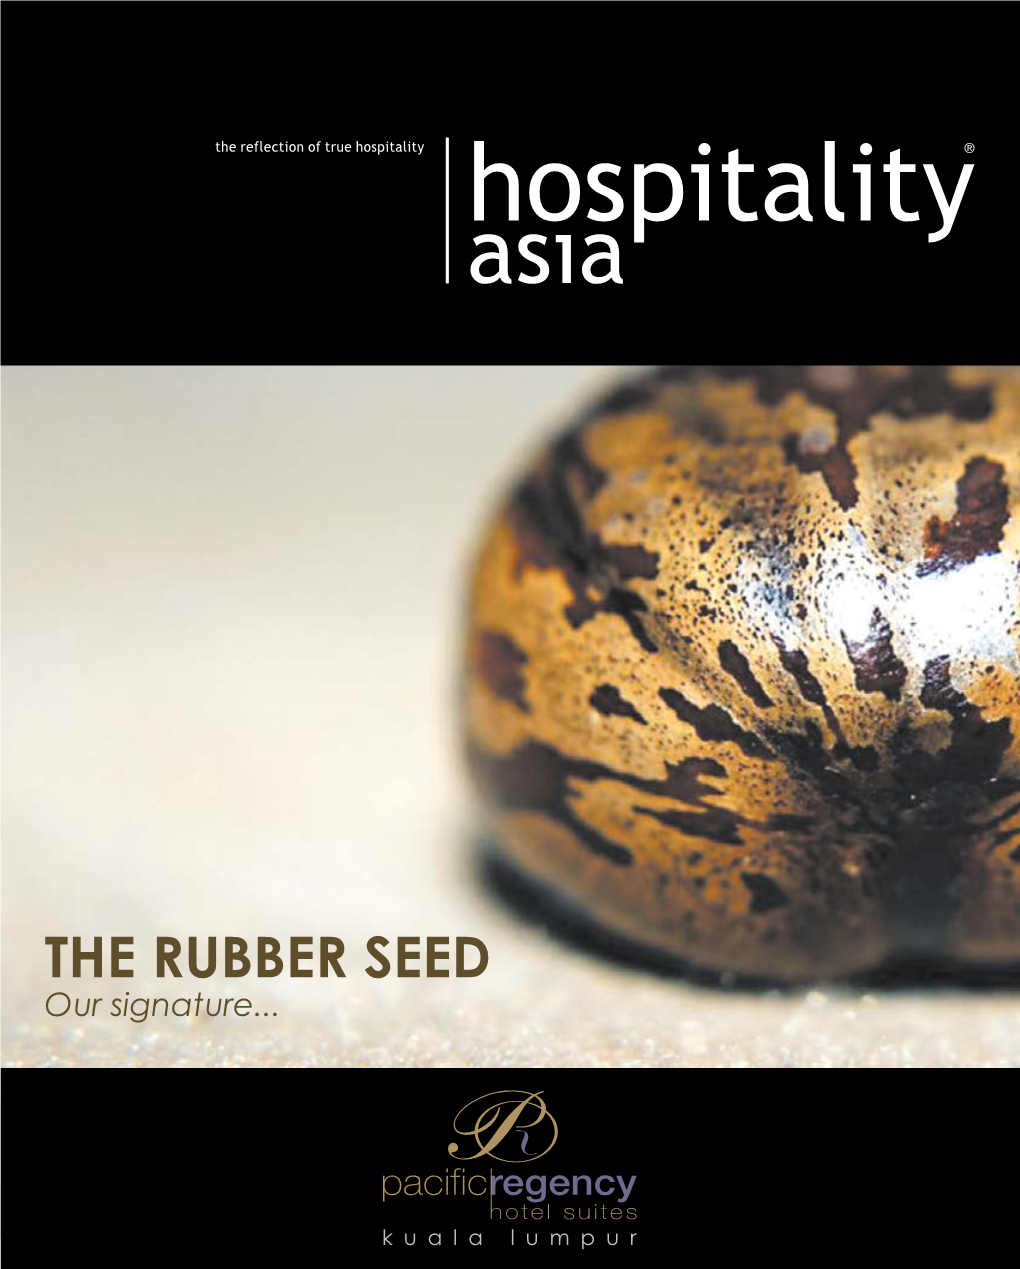 Hospitality Asia VOLUME 19 • ISSUE 4 OCTOBER-DECEMBER 2013 PP 8897/05/2013(032307) • MCI (P) 039/05/2013